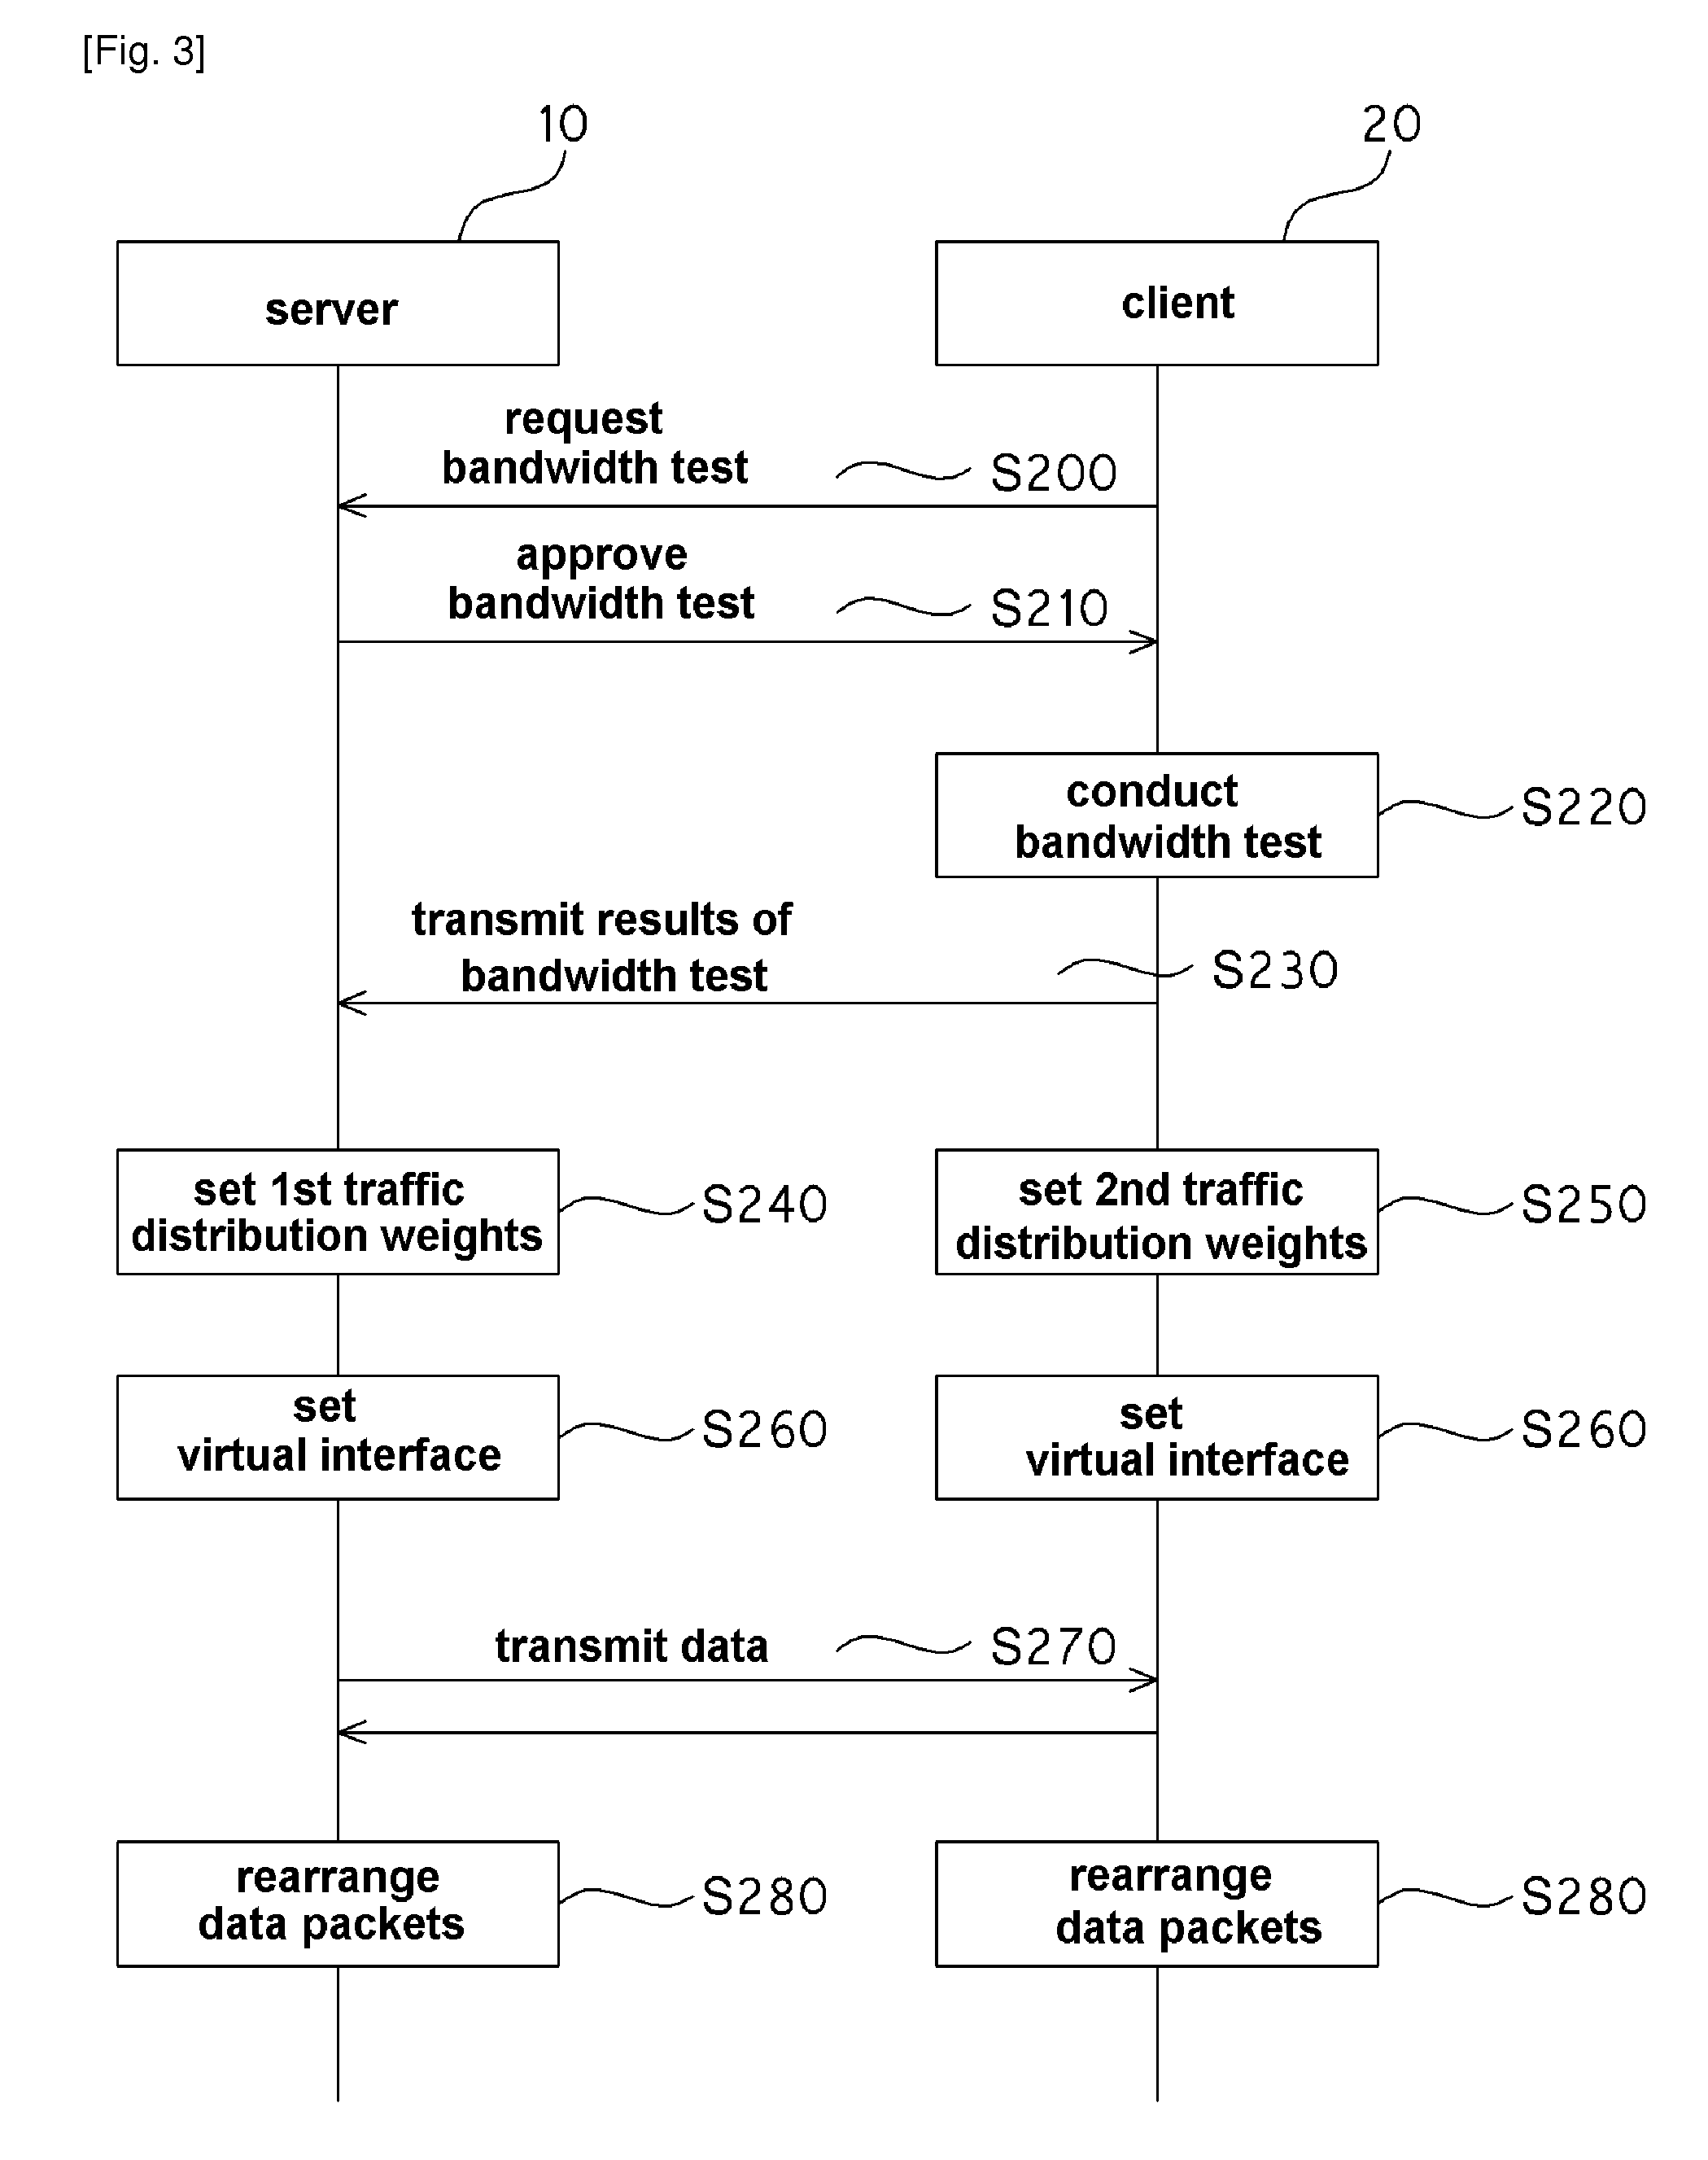 Method and System for Transmitting Data Using Traffic Distribution for Each Line Between Server and Client Connected by Virtual Interface